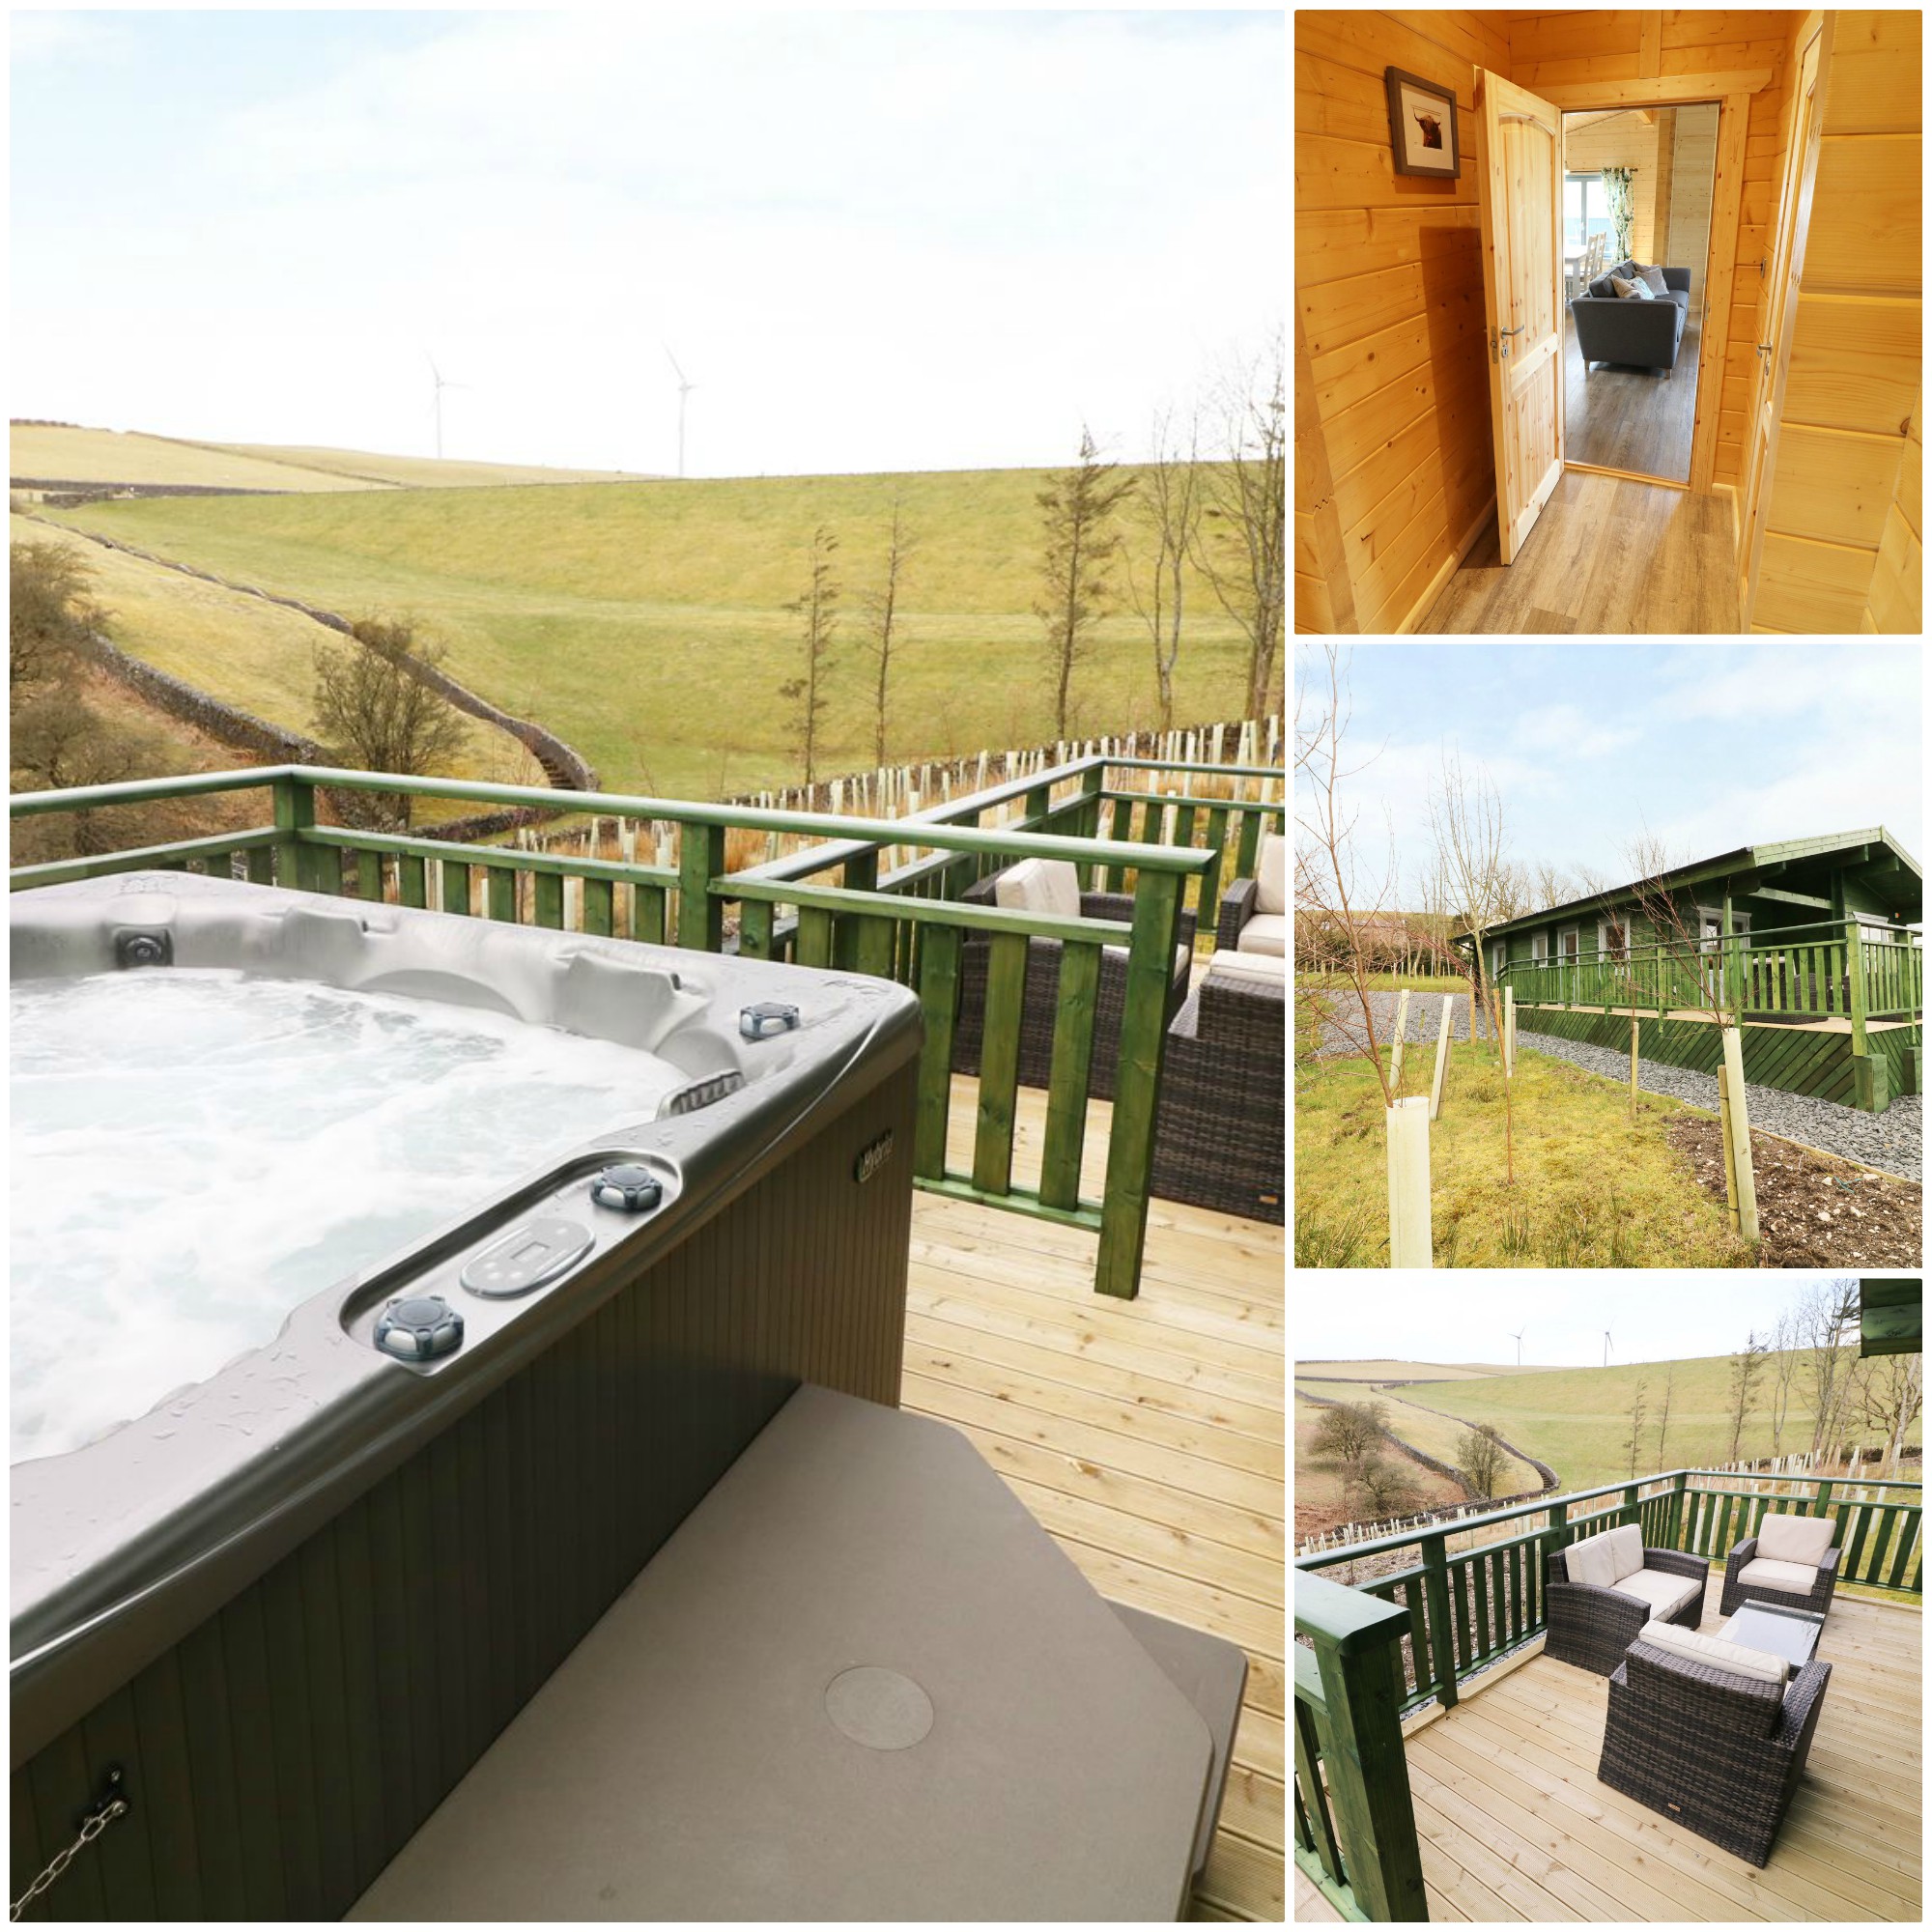 just three miles from Ulverston Elm Lodge is perfect for a family of 4 wanting to unwind and has the added bonus of a hot tub